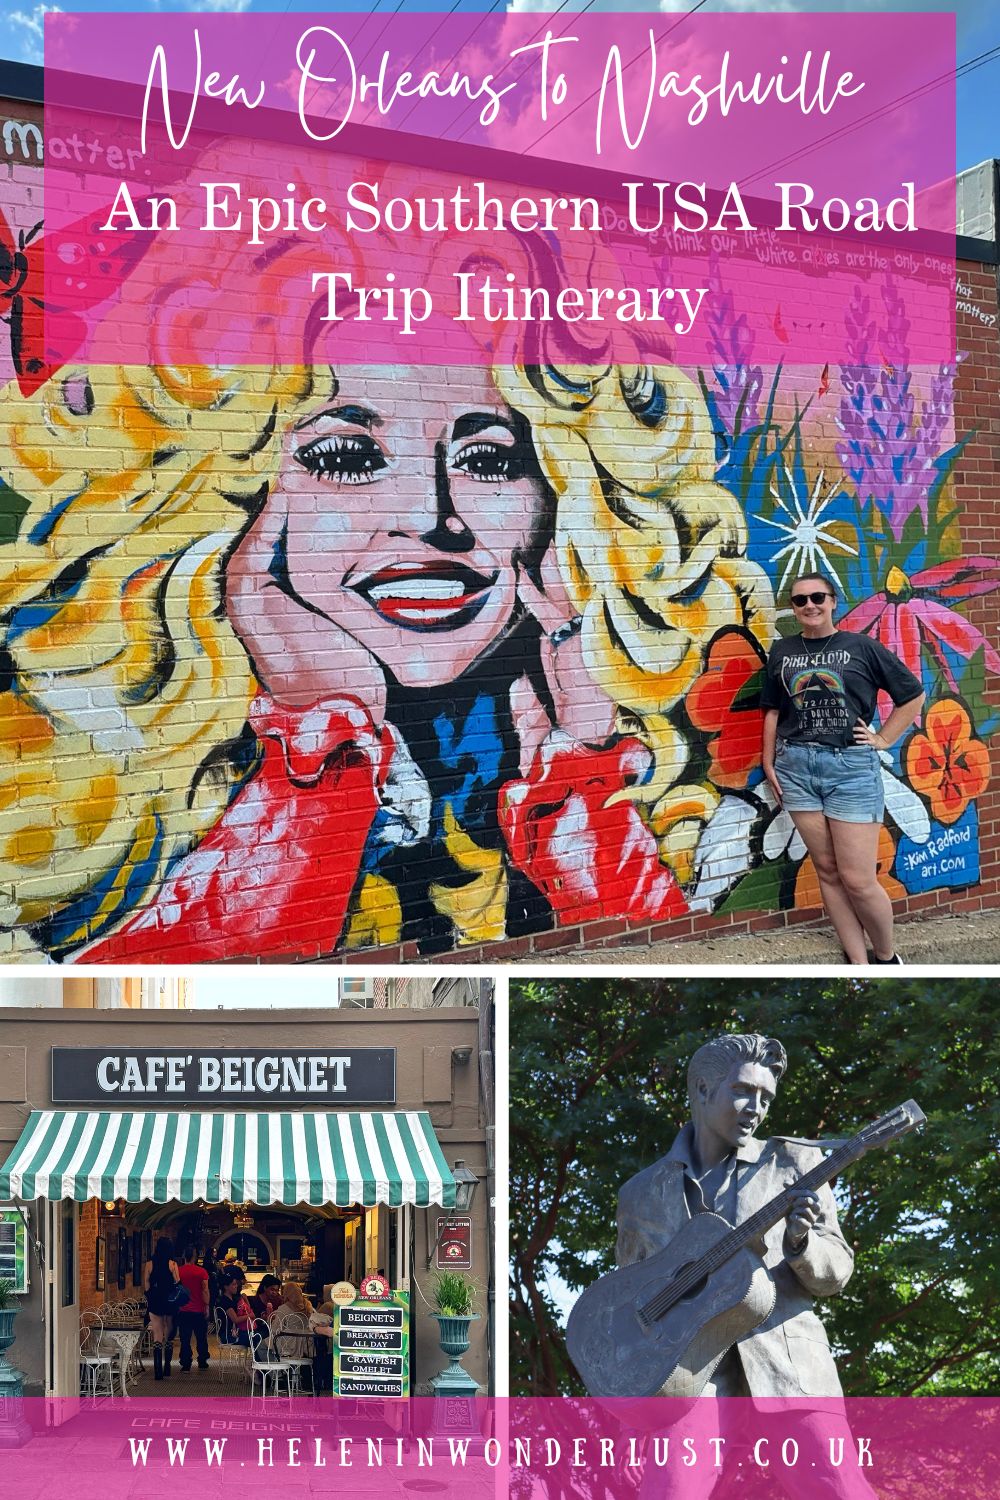 New Orleans to Nashville – An Epic Southern USA Road Trip Itinerary